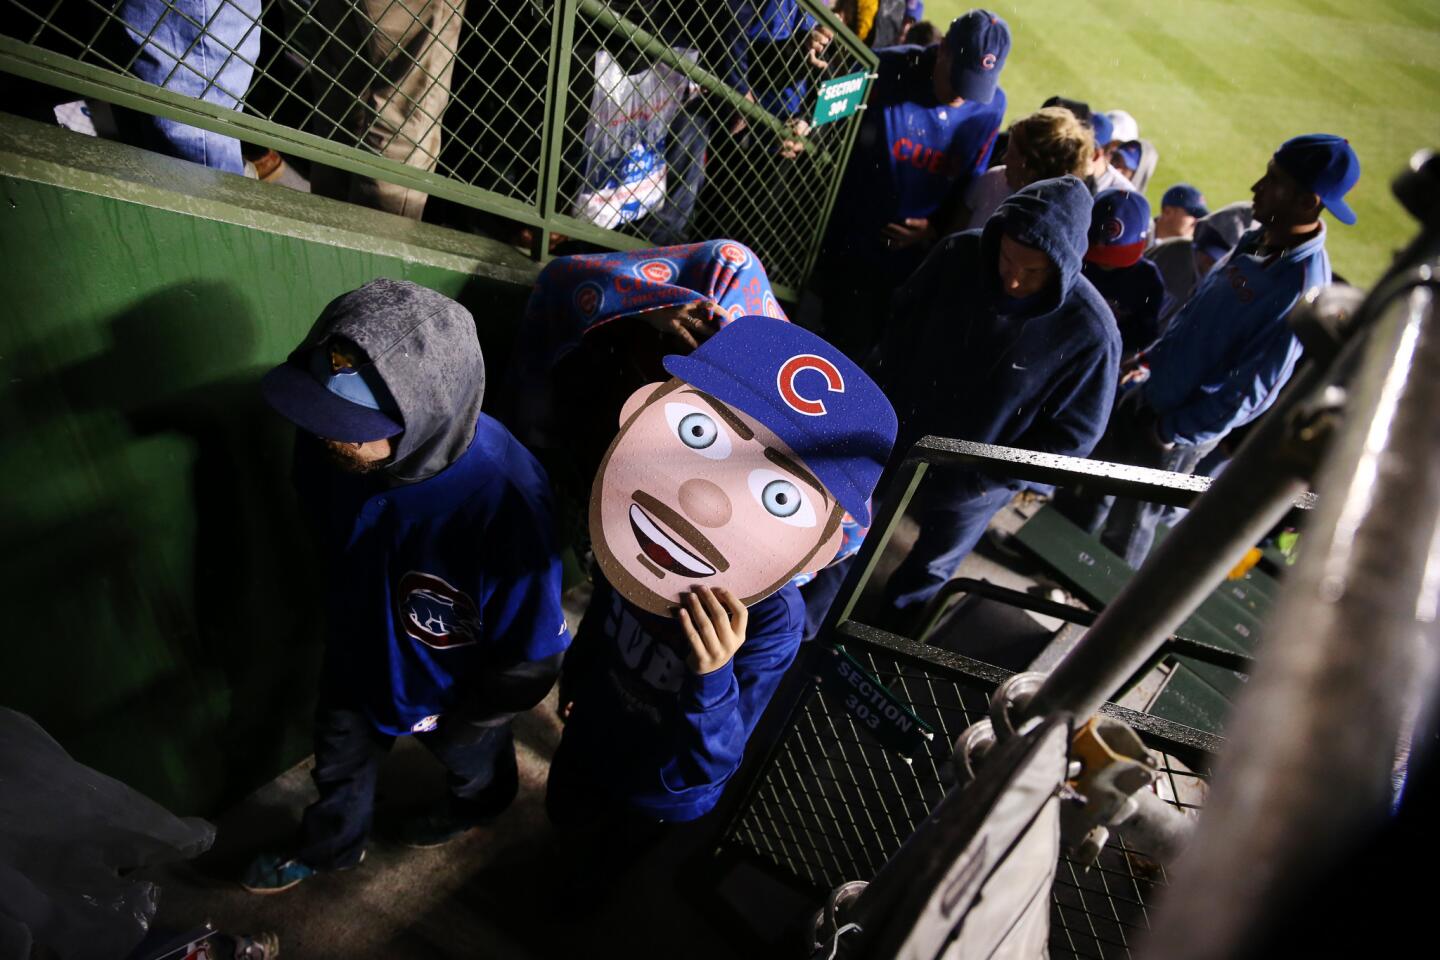 Cubs fans file out of Wrigley Field after losing Game 3.